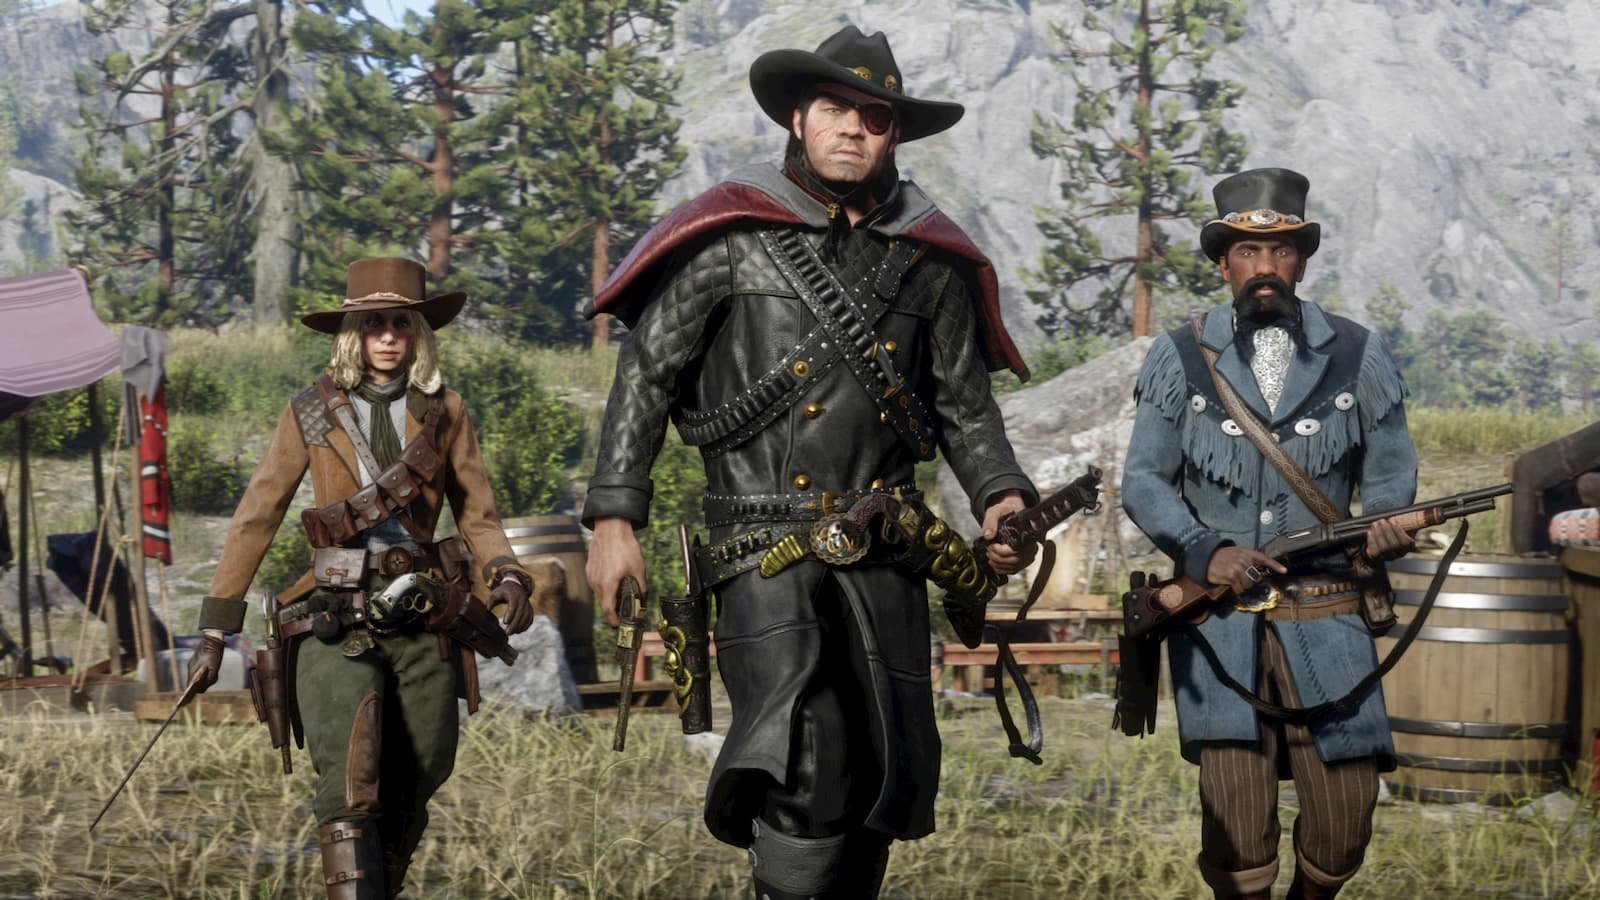 where to buy a house in red dead redemption 2